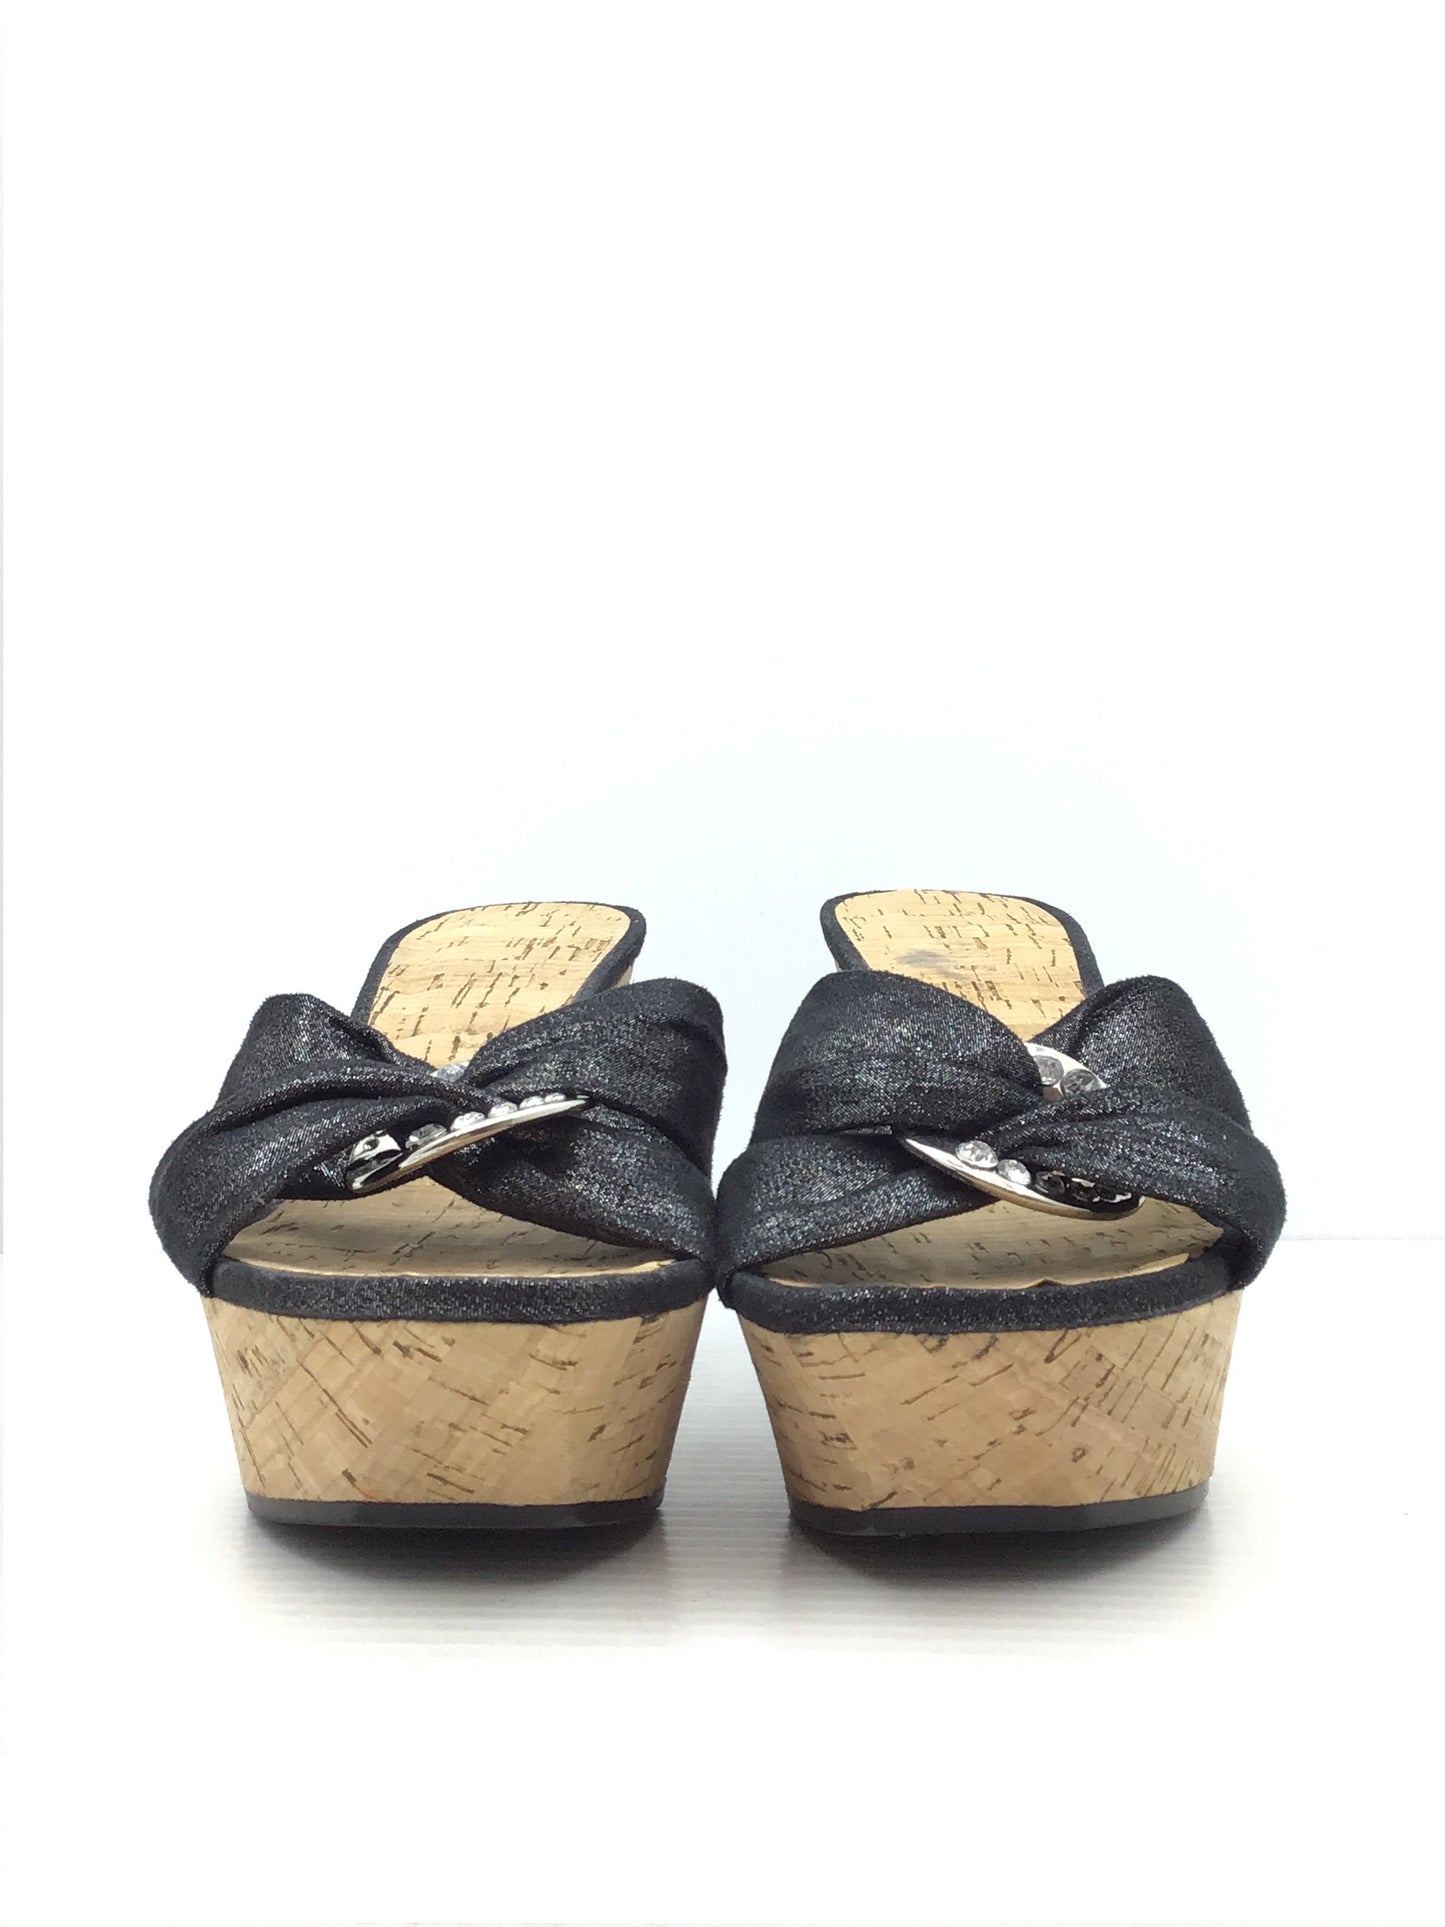 Sandals Heels Wedge By Guess  Size: 8